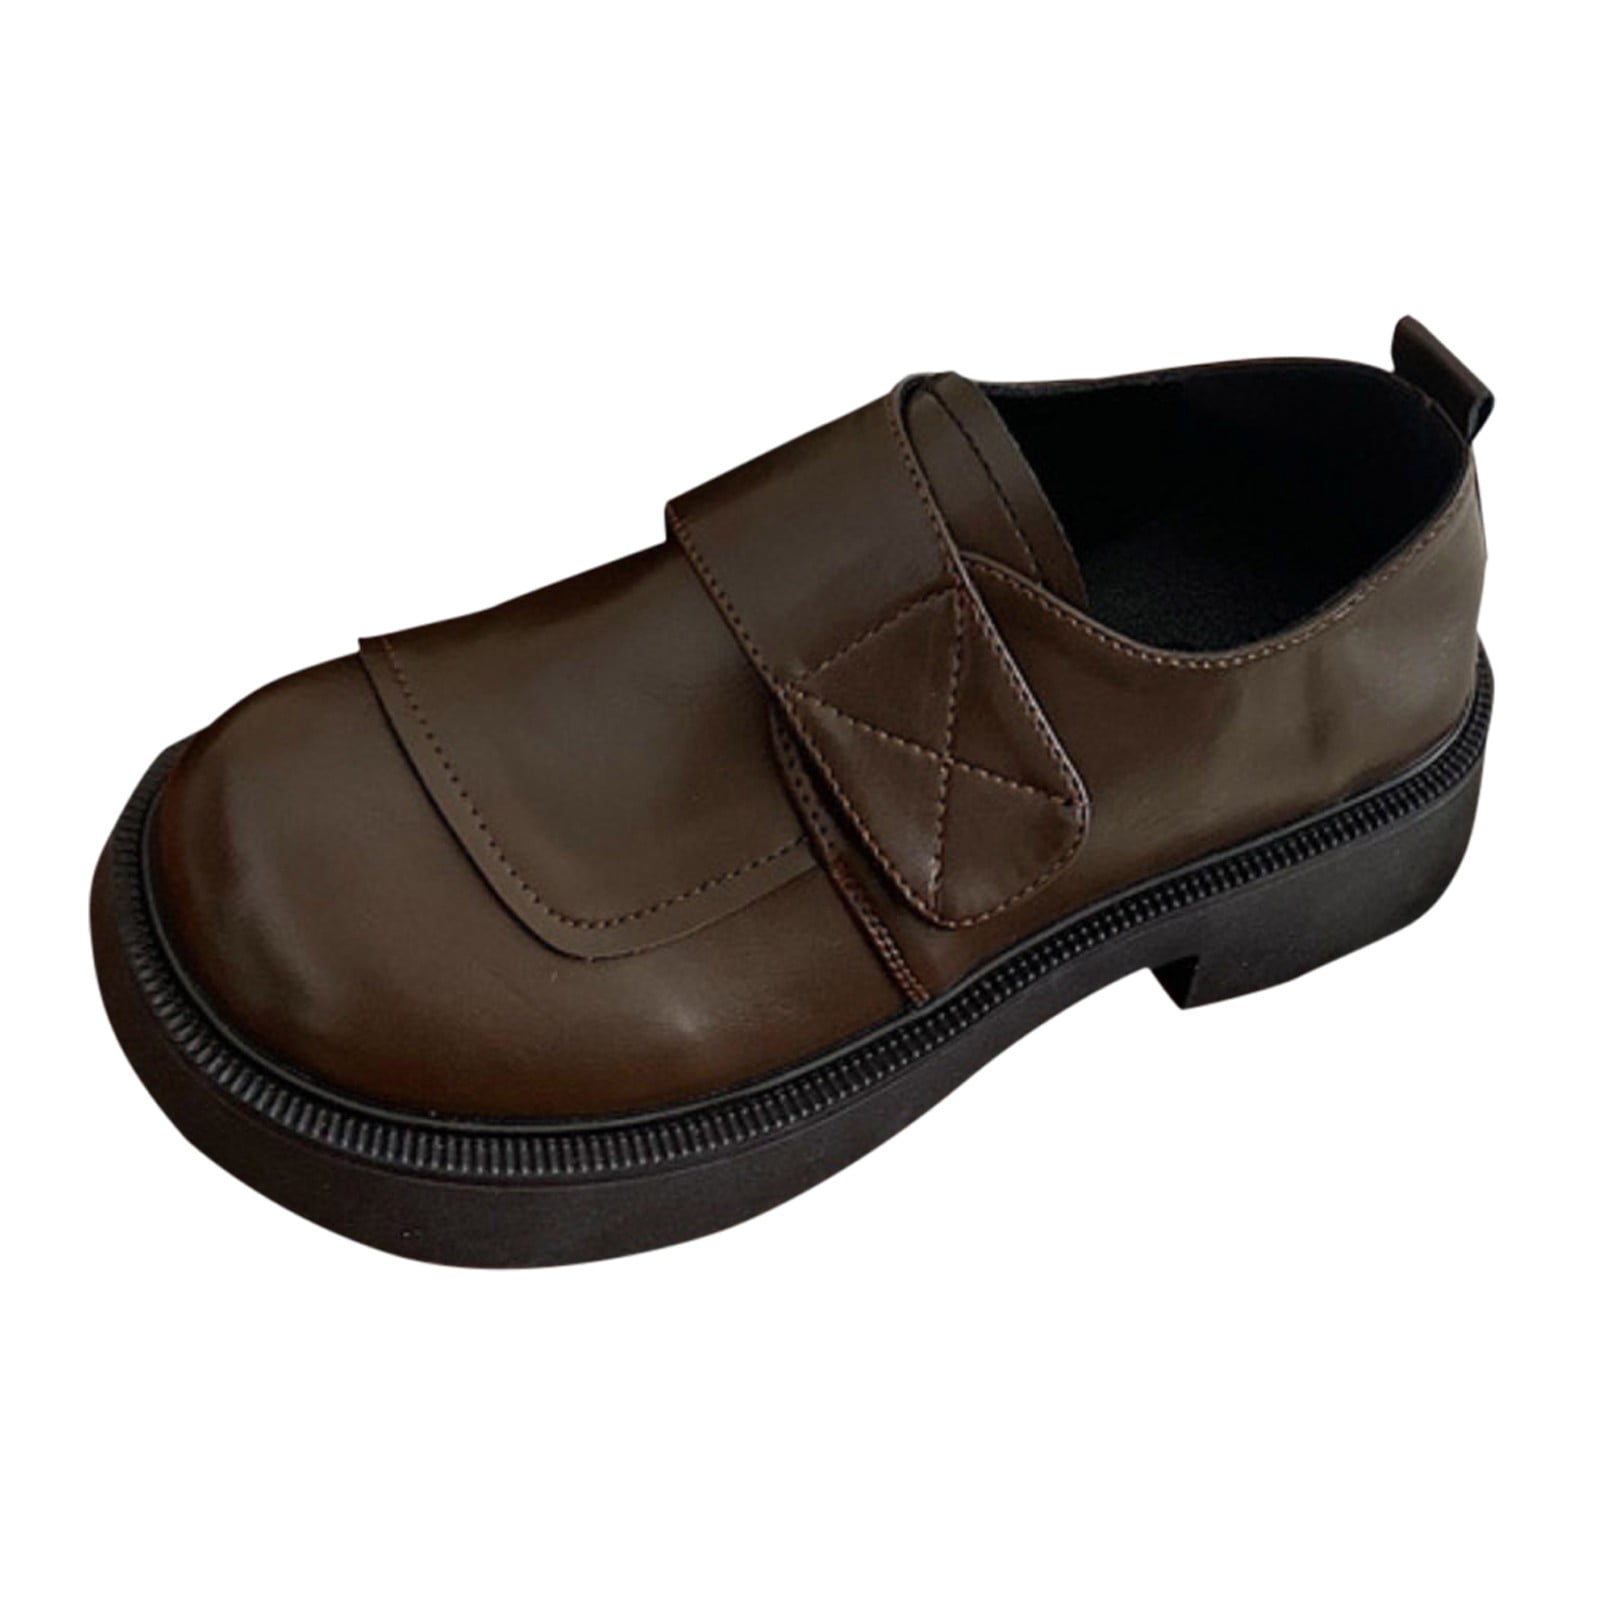 womens dress shoes with wide toe box